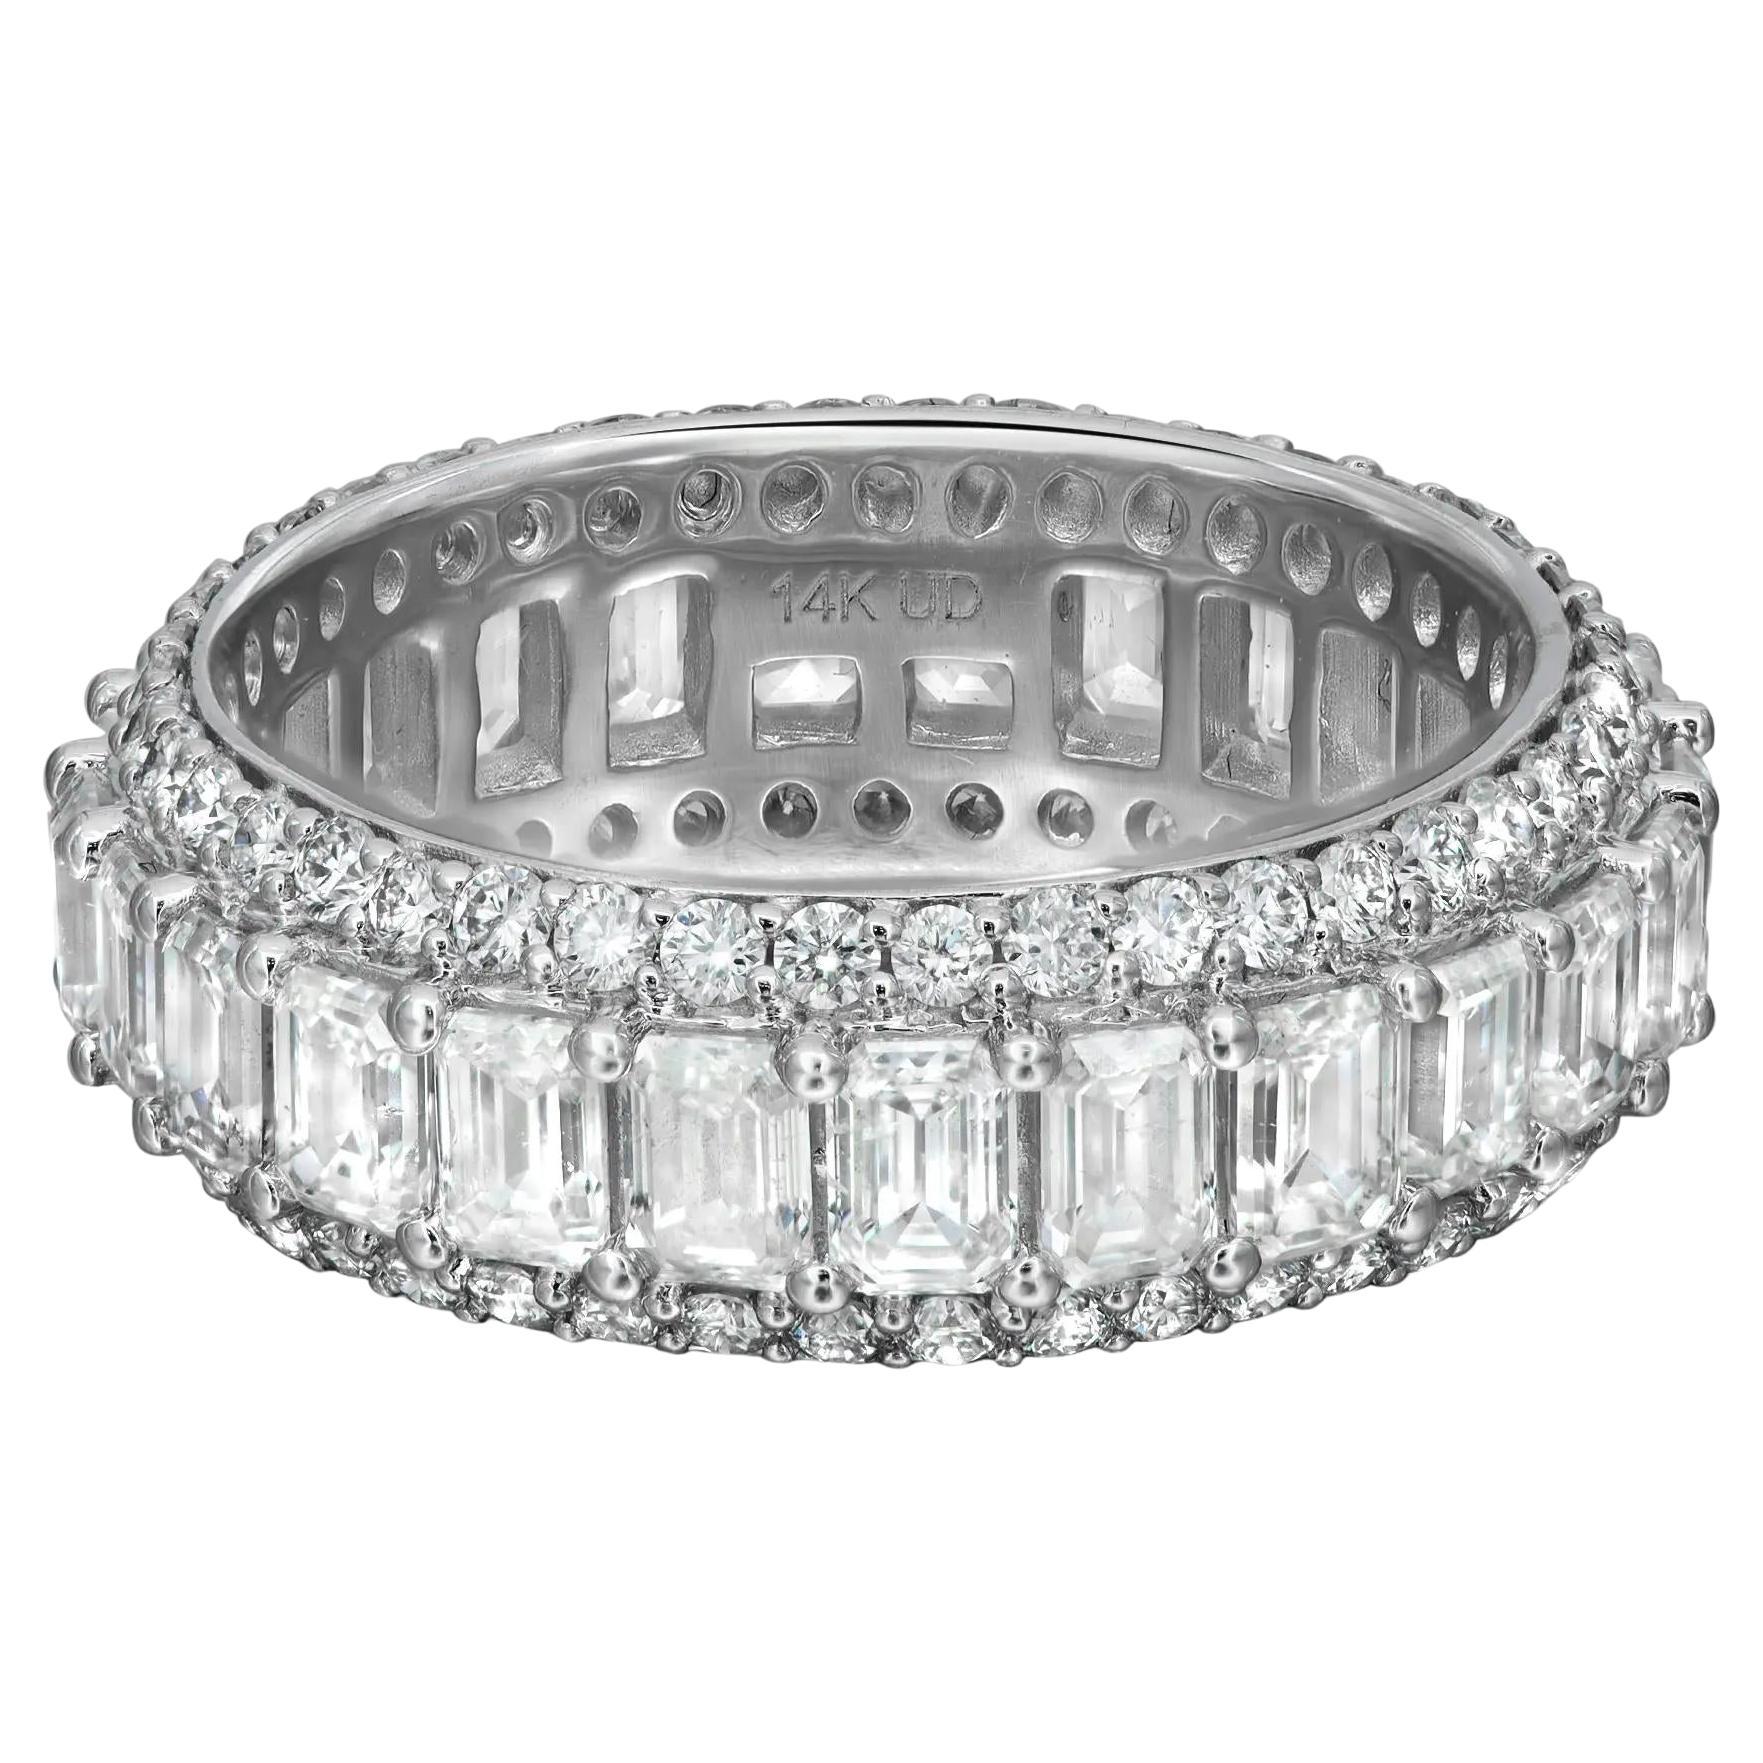 Diamond Ring Baguette & Round Cut In 14K White Gold 4.75Cttw